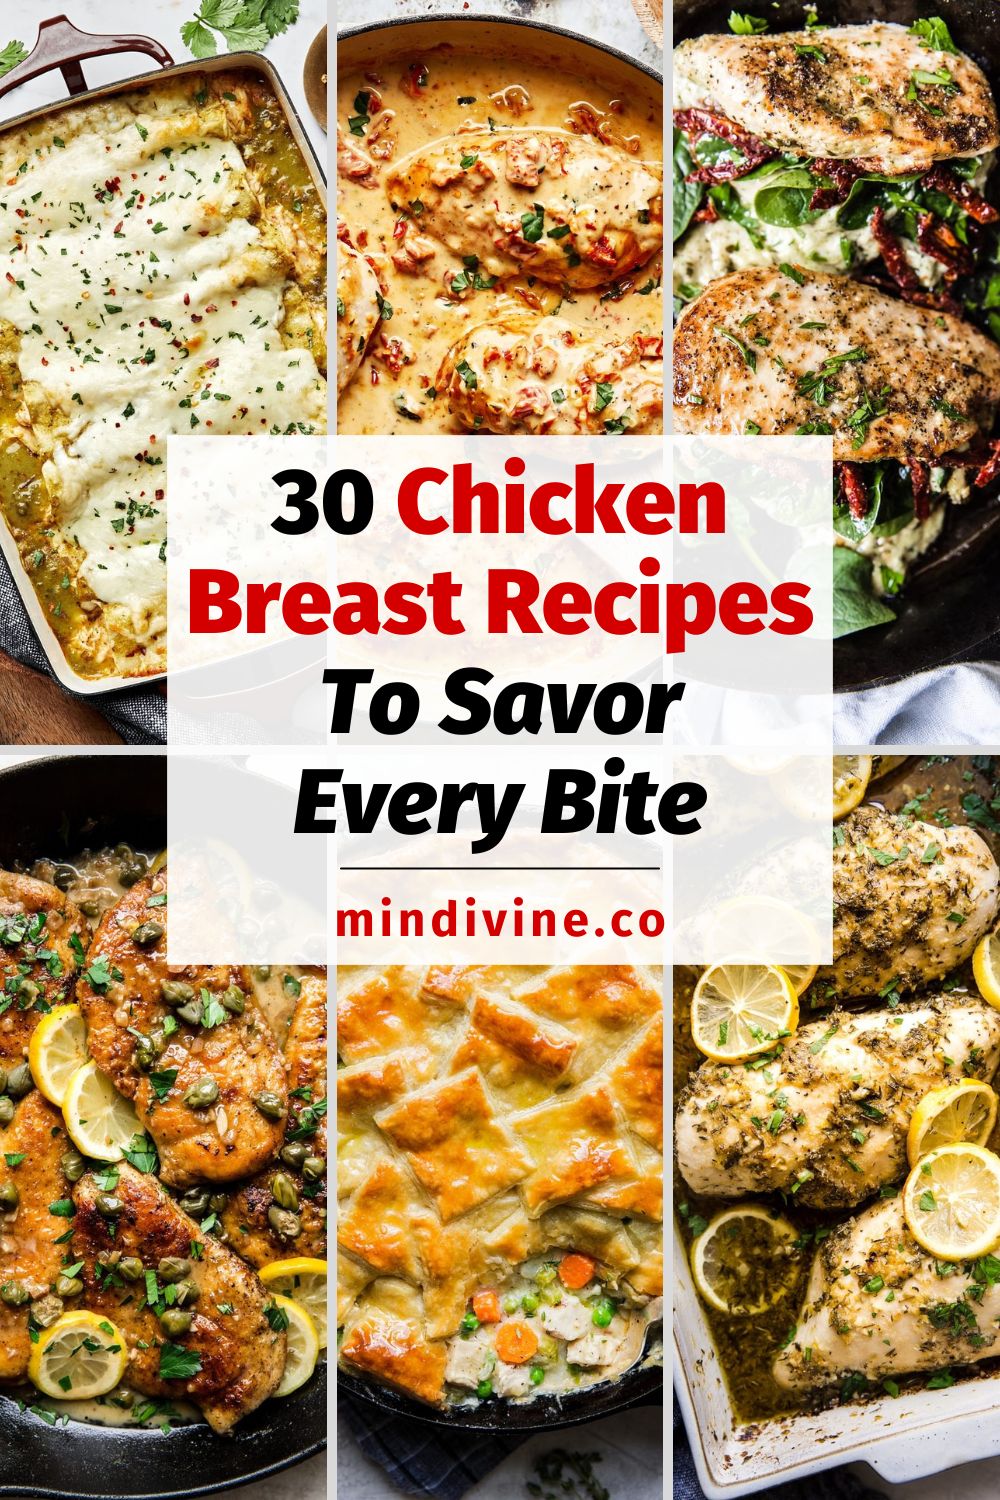 6 images of chicken breast recipes